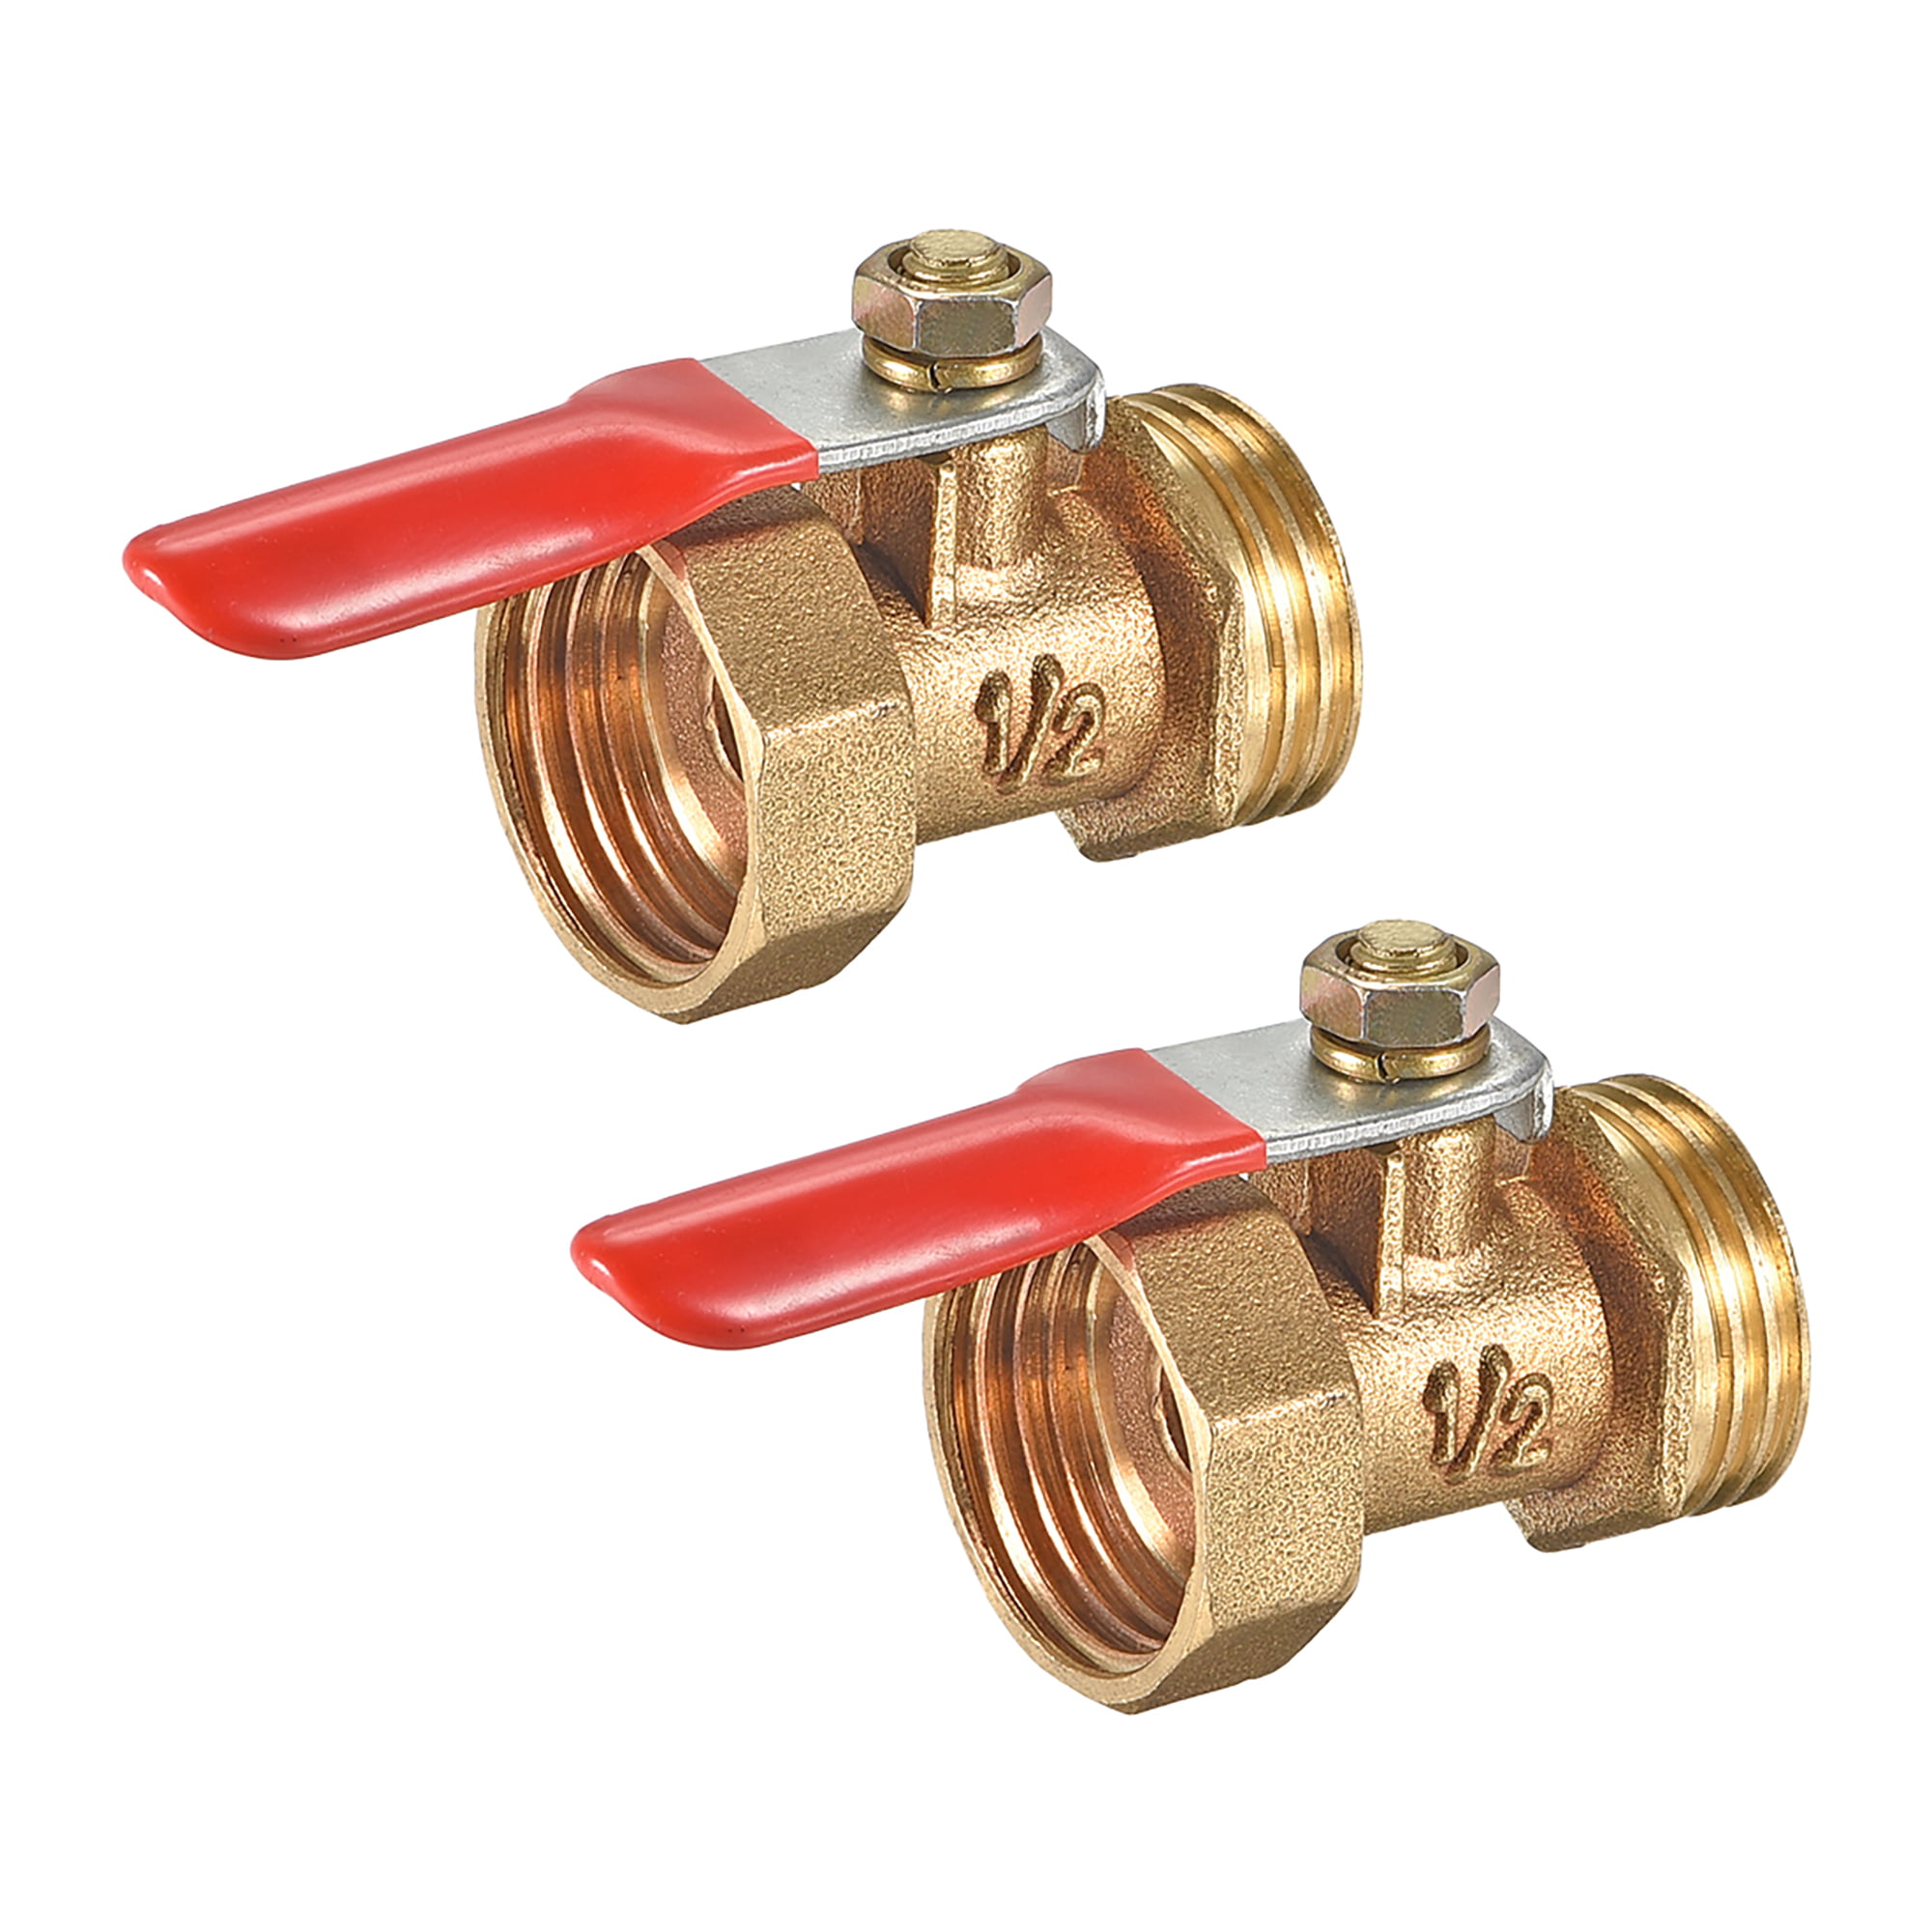 Male to Female Thread Ball Valve air Compressor for Valve Switch air Pump Outlet 5 pcs G1 / 2 Thick Brass Ball Valve